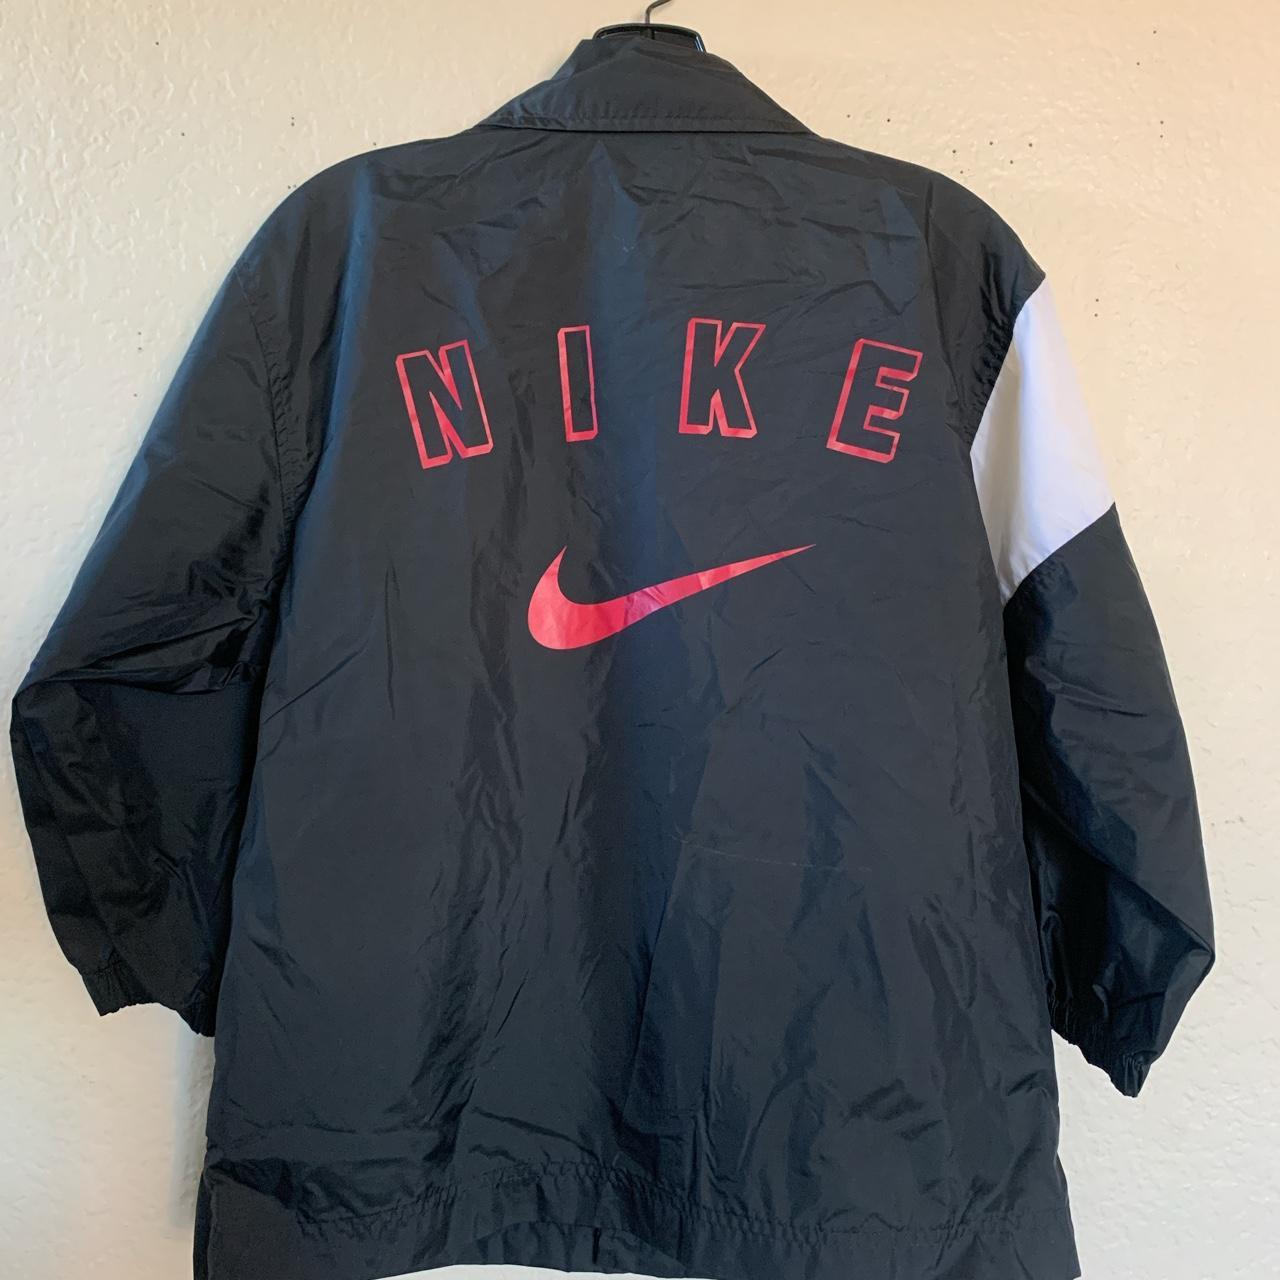 Nike Women's Black and Red Jacket